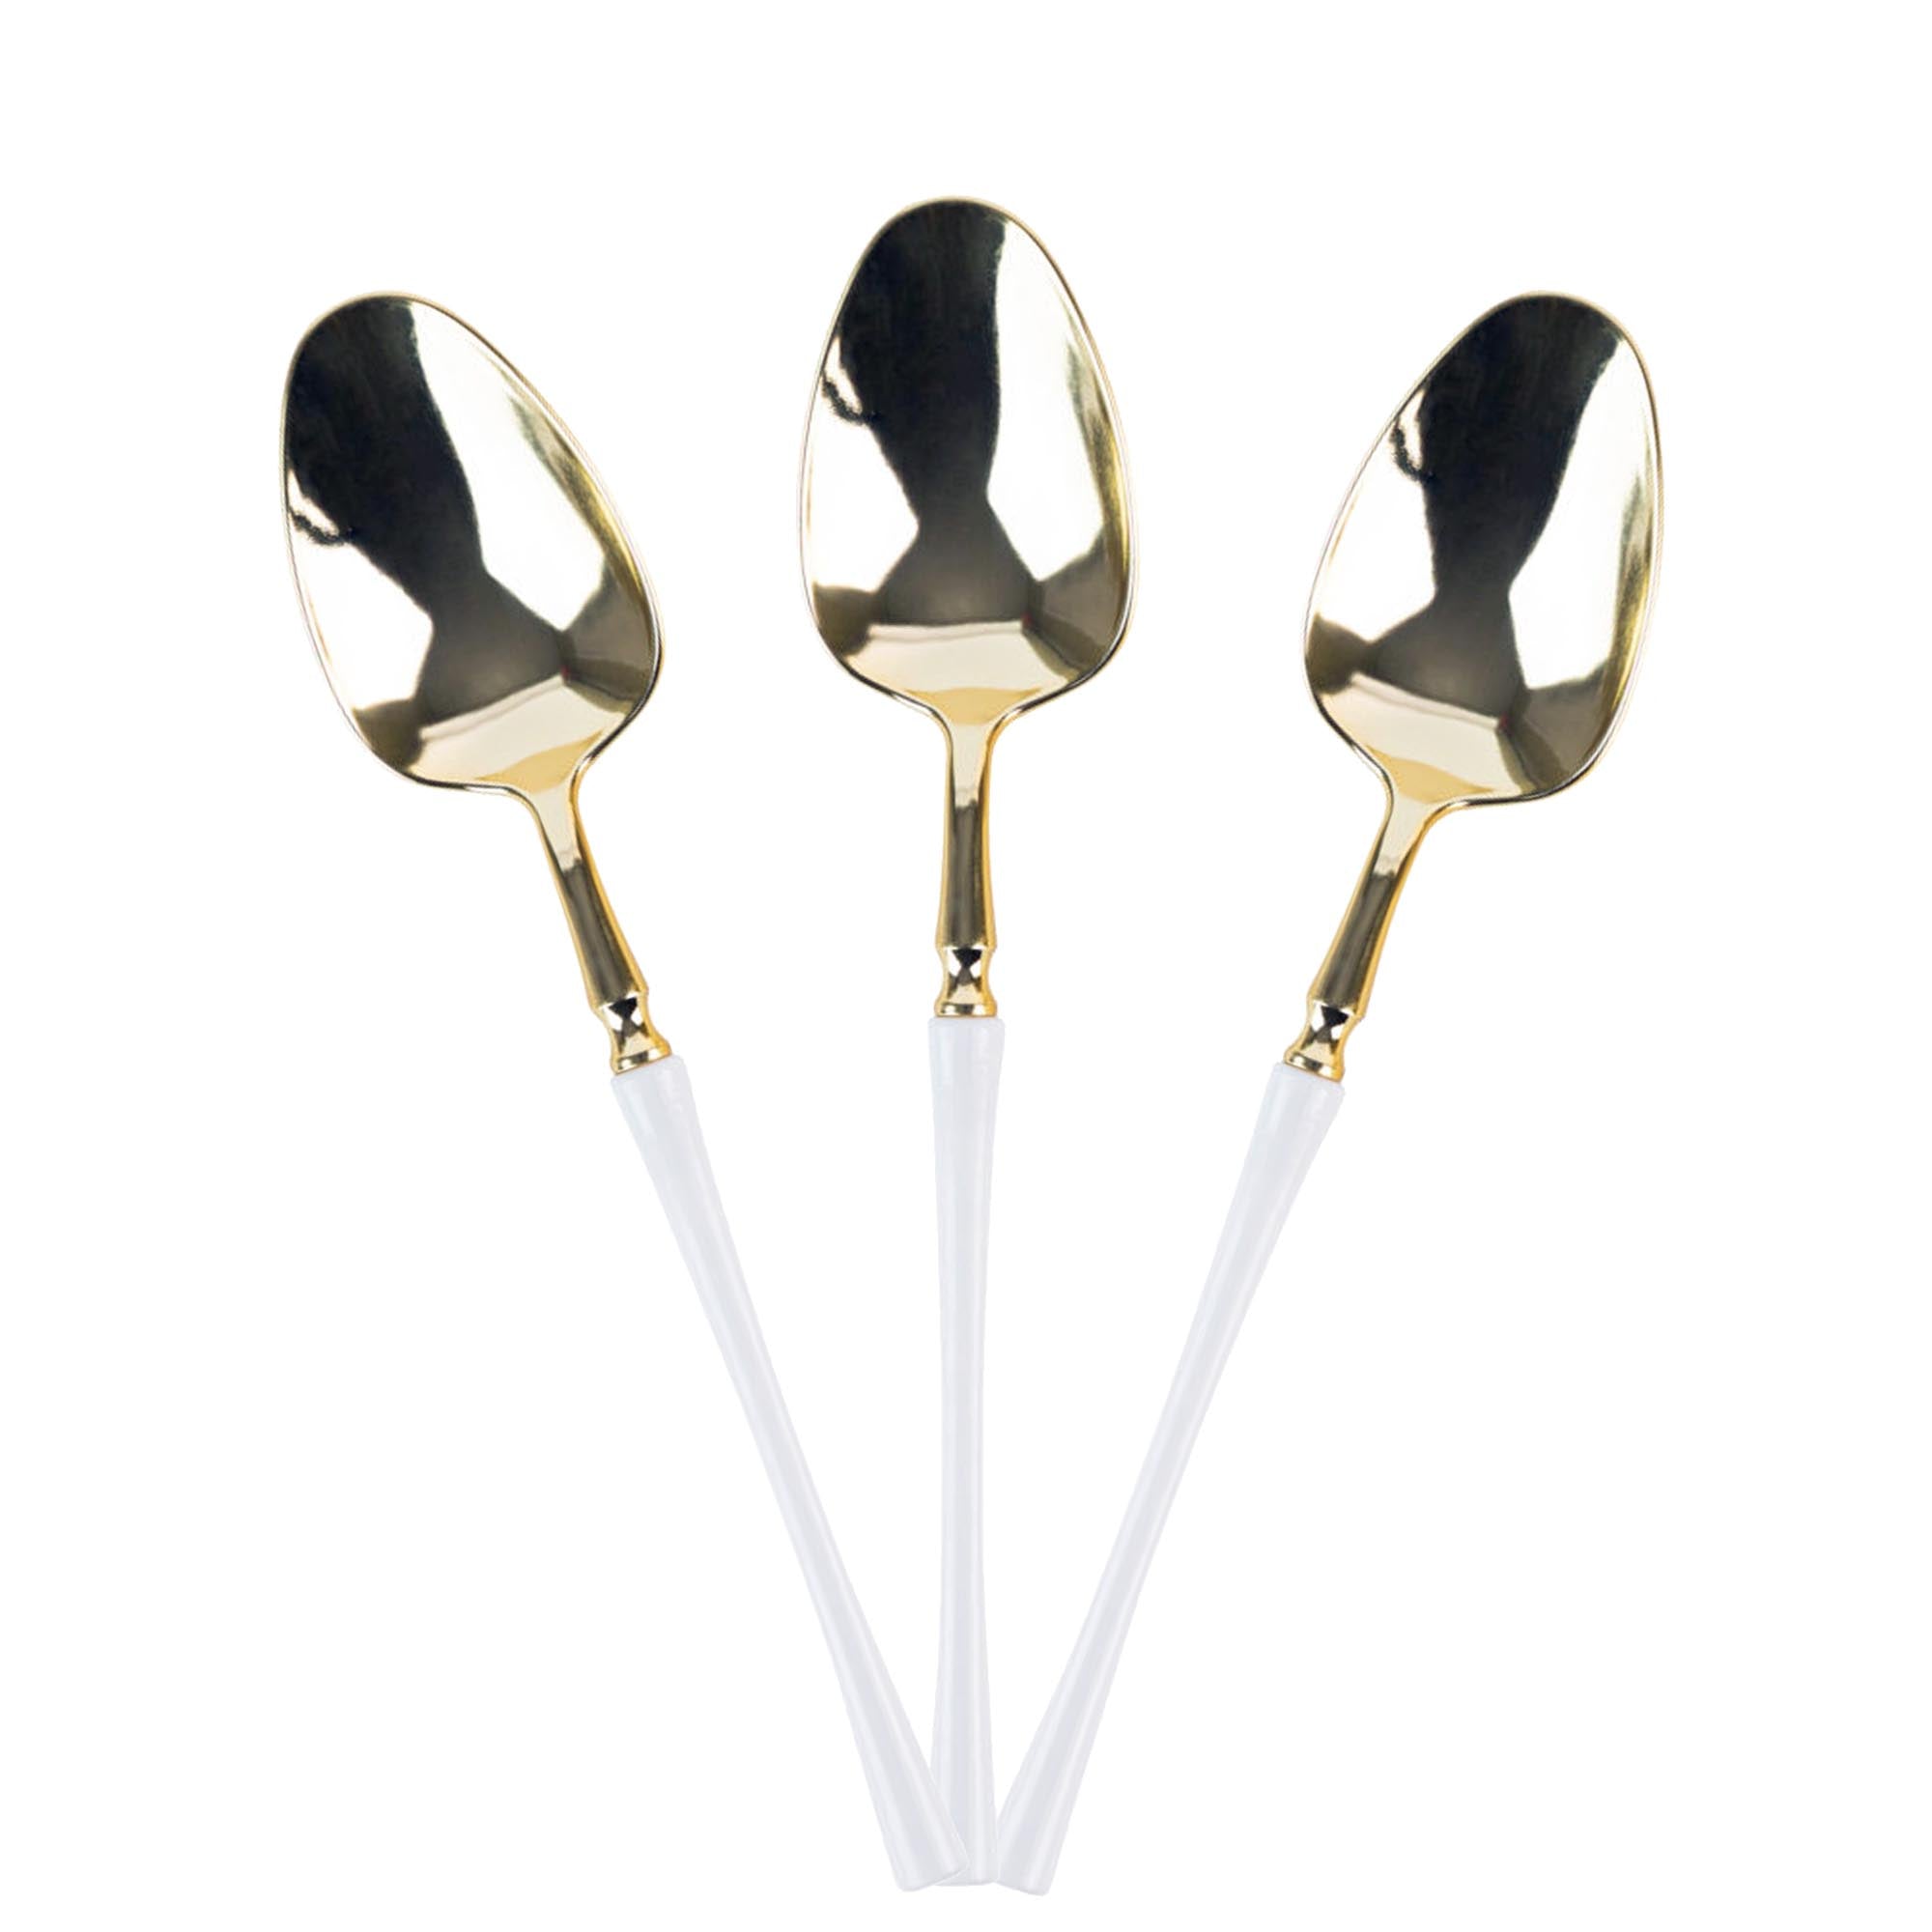 Plastic Soup Spoons White and Gold Infinity Flatware Collection